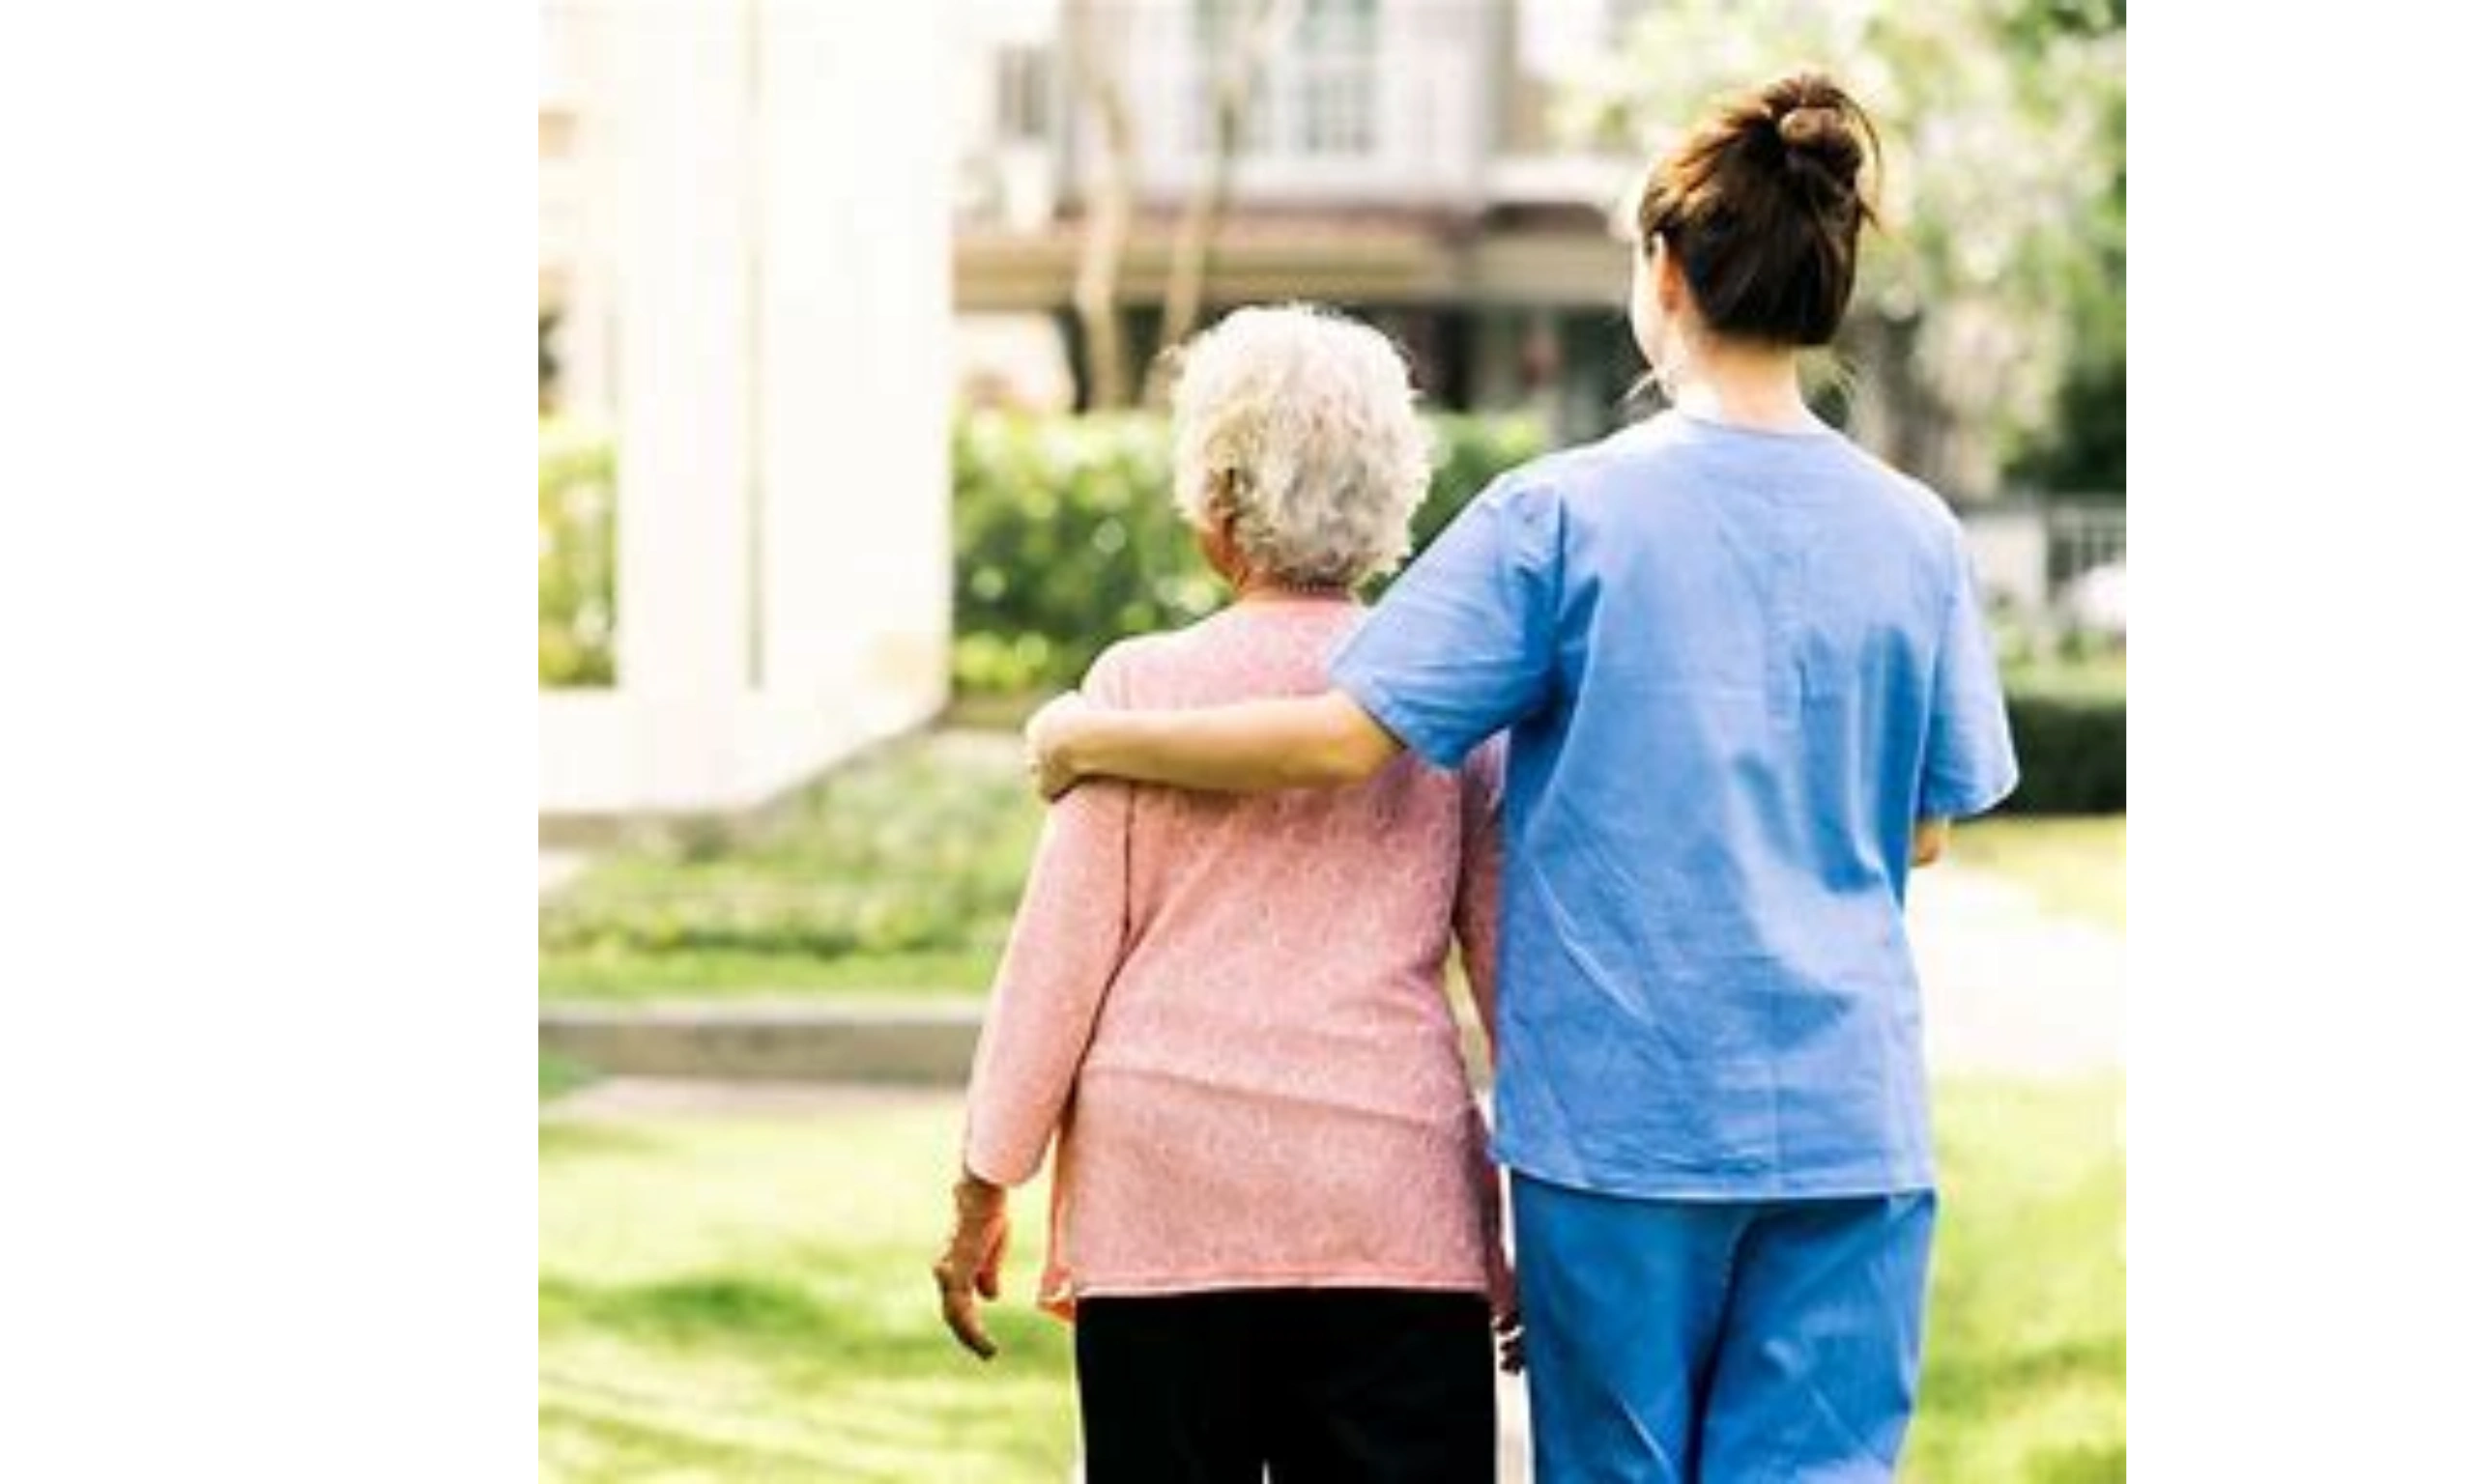 Caregiver Stability in Uncertain Times